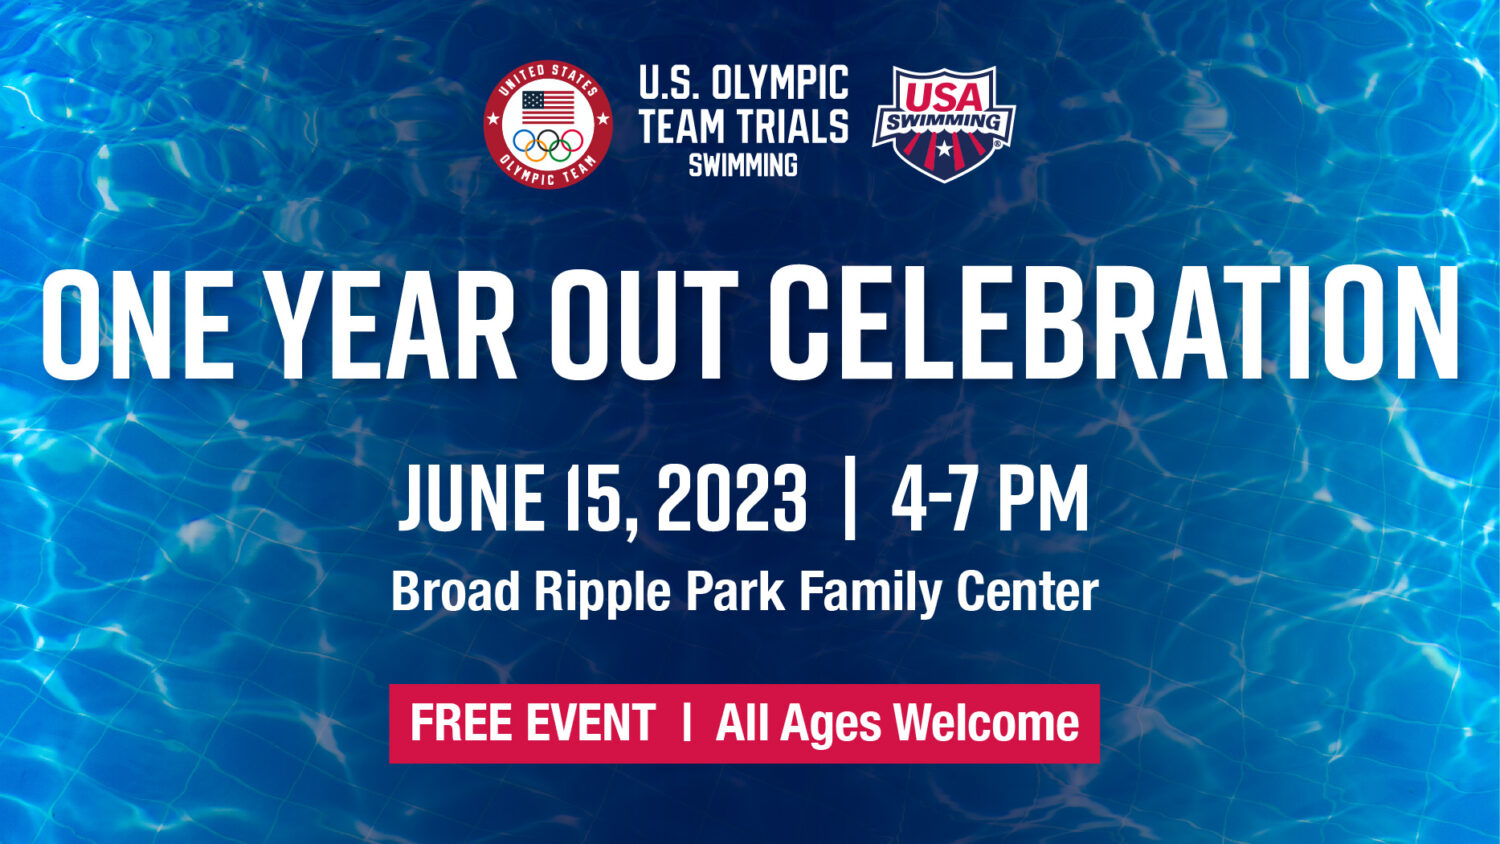 One Year Out Celebration for 2024 US Olympic Team Trials Swimming